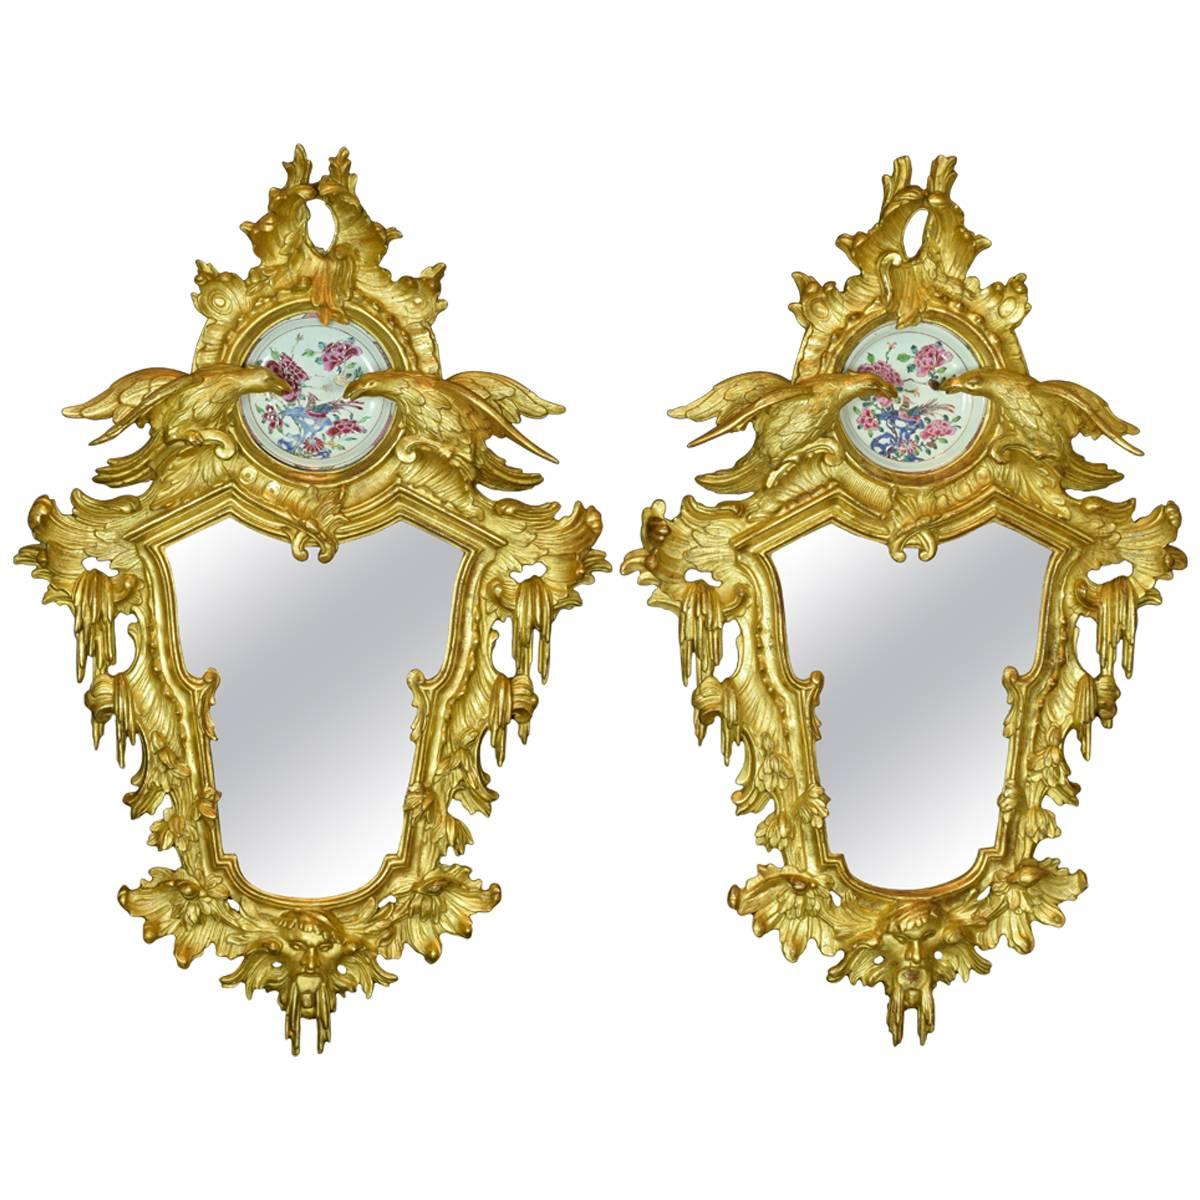 Pair of Giltwood Mirrors with Porcelain, Rococo, 18th Century